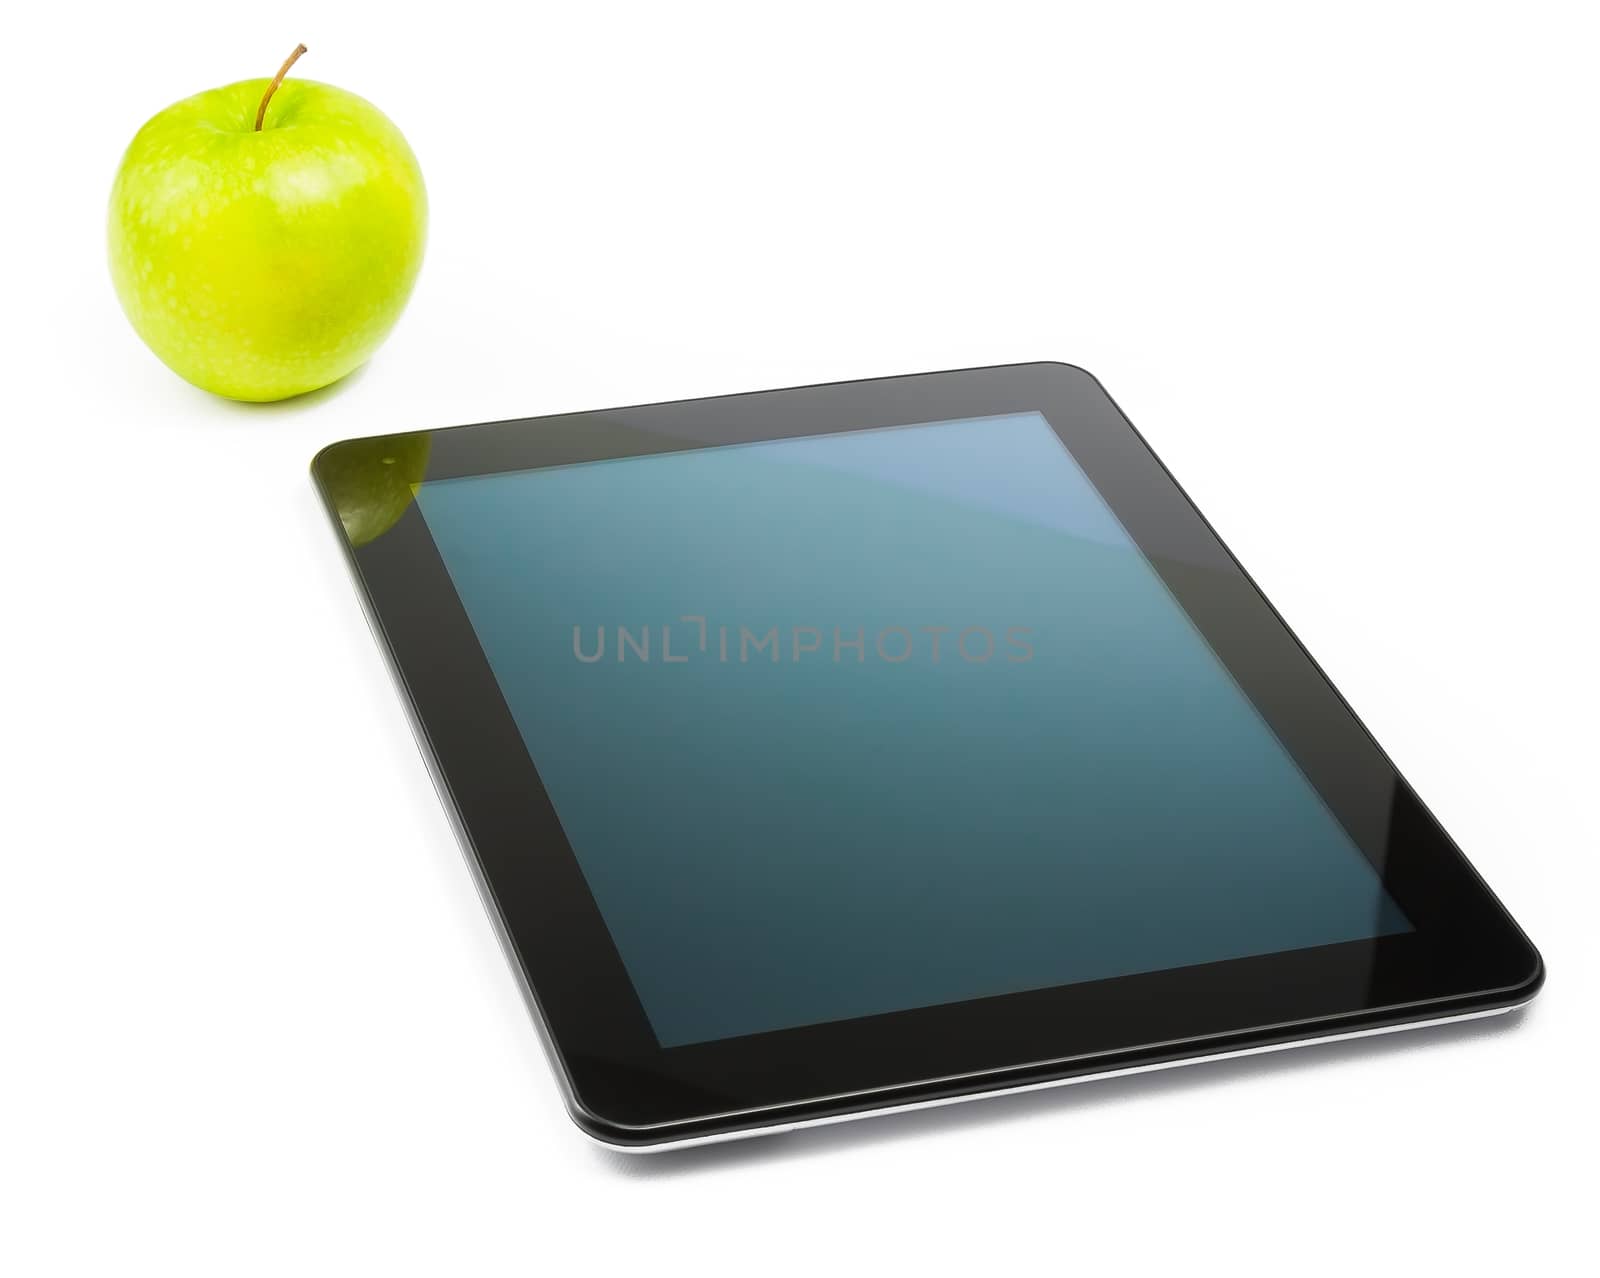 digital tablet pc near green apple on white background, concept of learn new technology